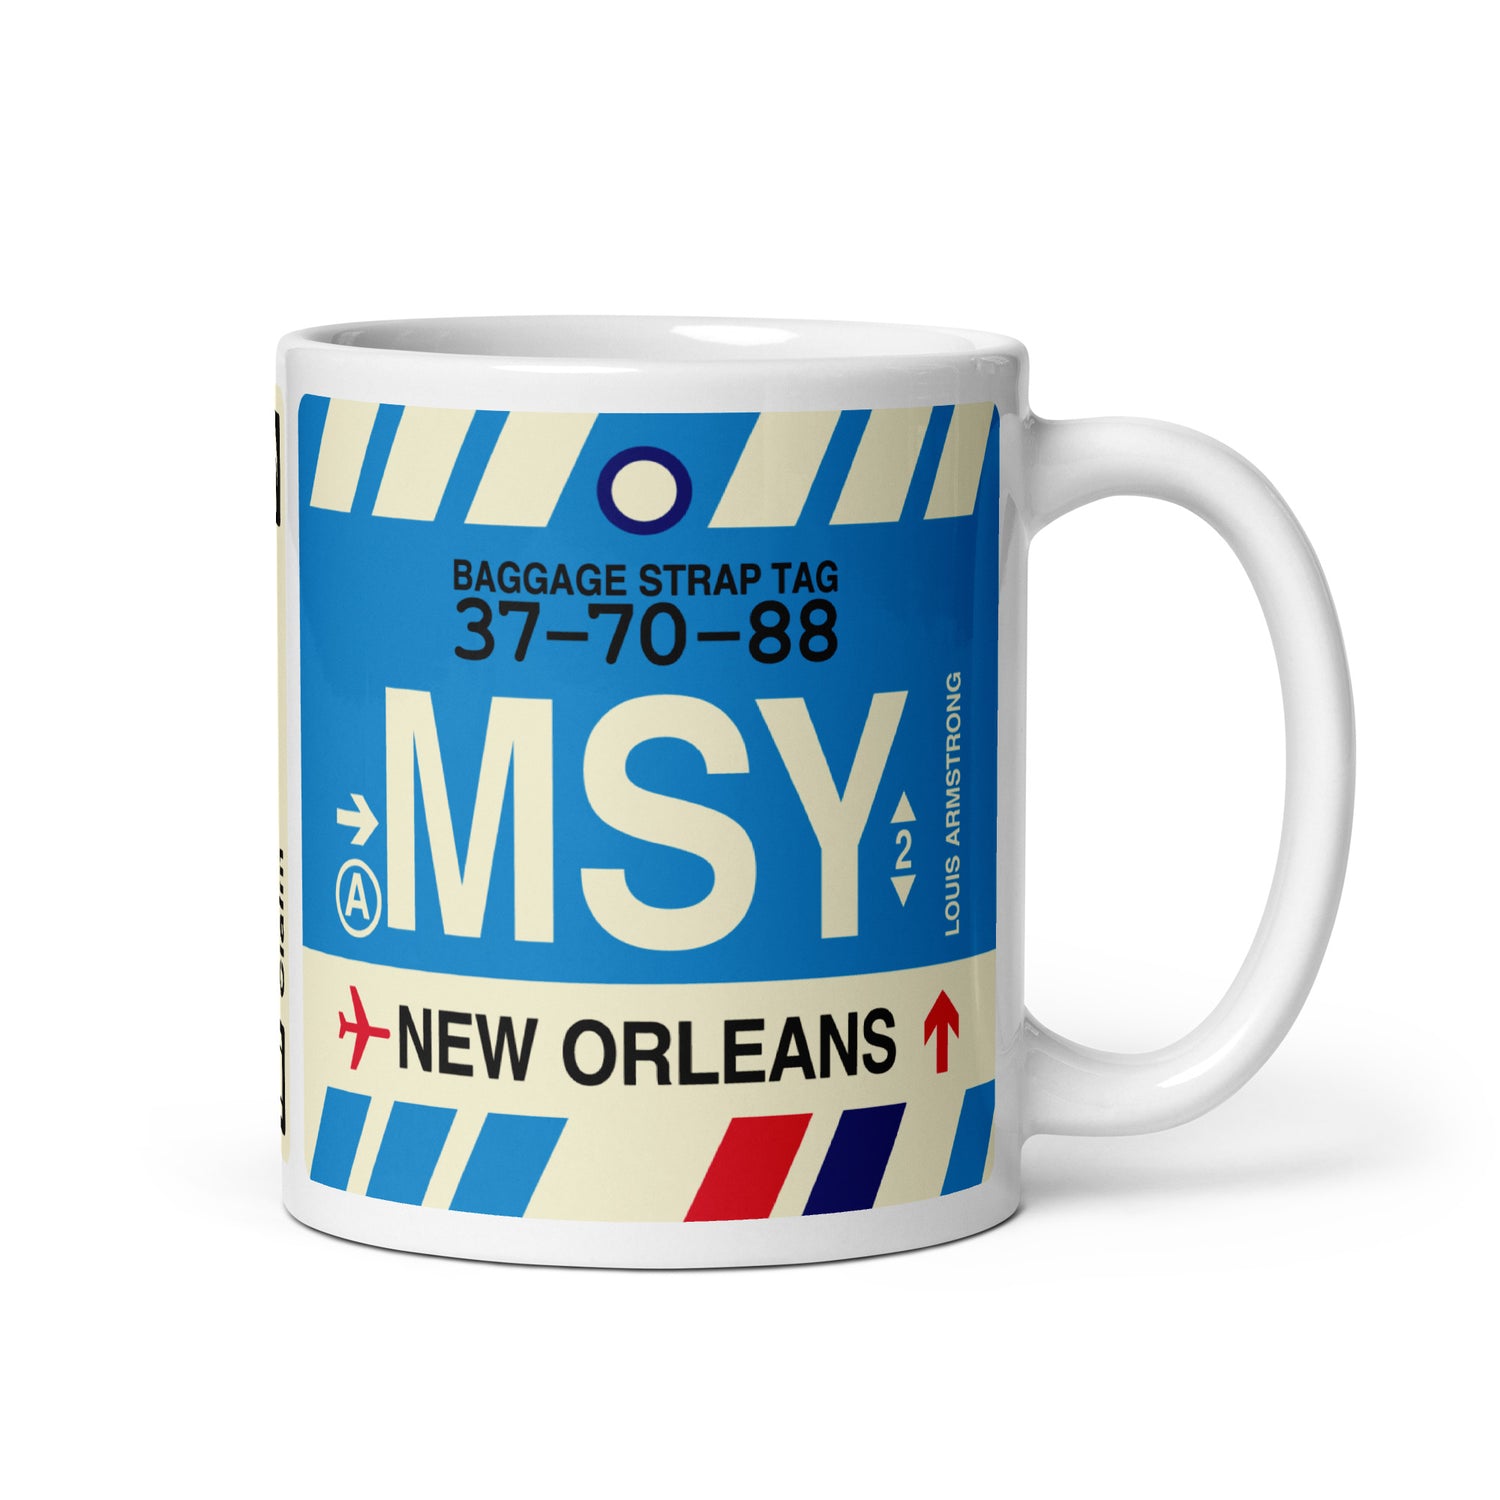 New Orleans Louisiana Coffee Mugs and Water Bottles • MSY Airport Code